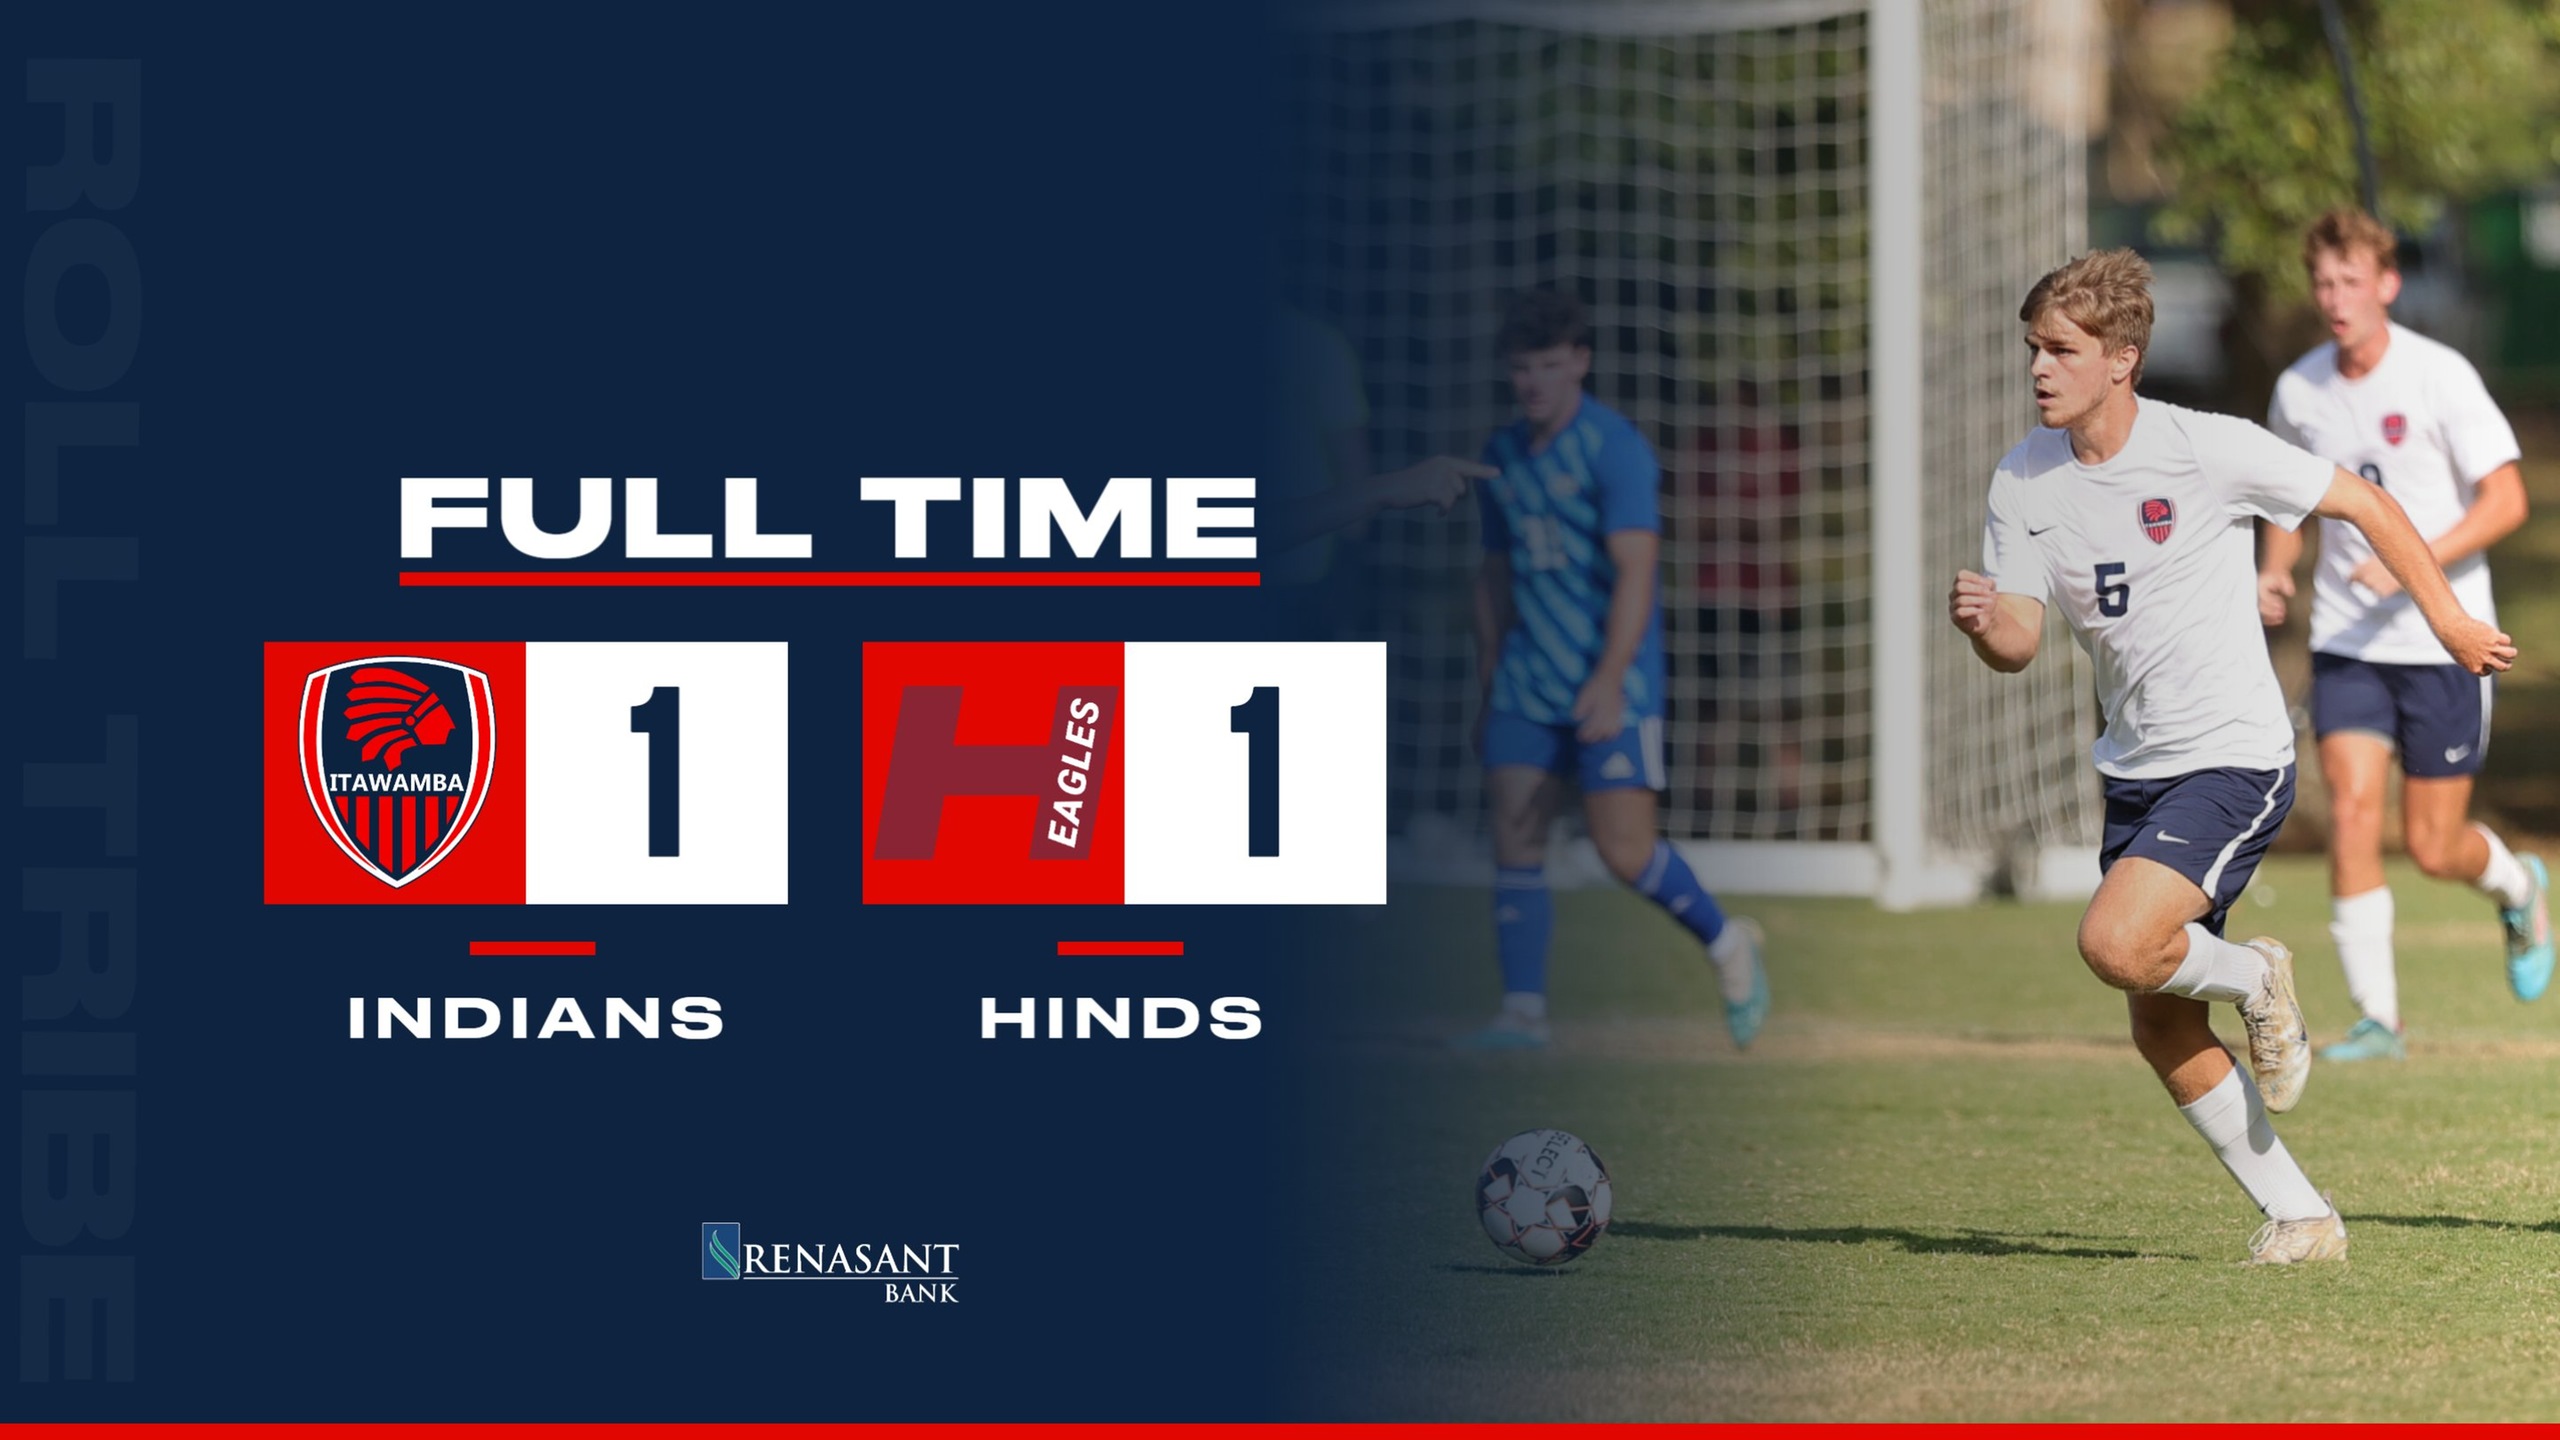 Indians’ match with Hinds ends in 1-1 draw